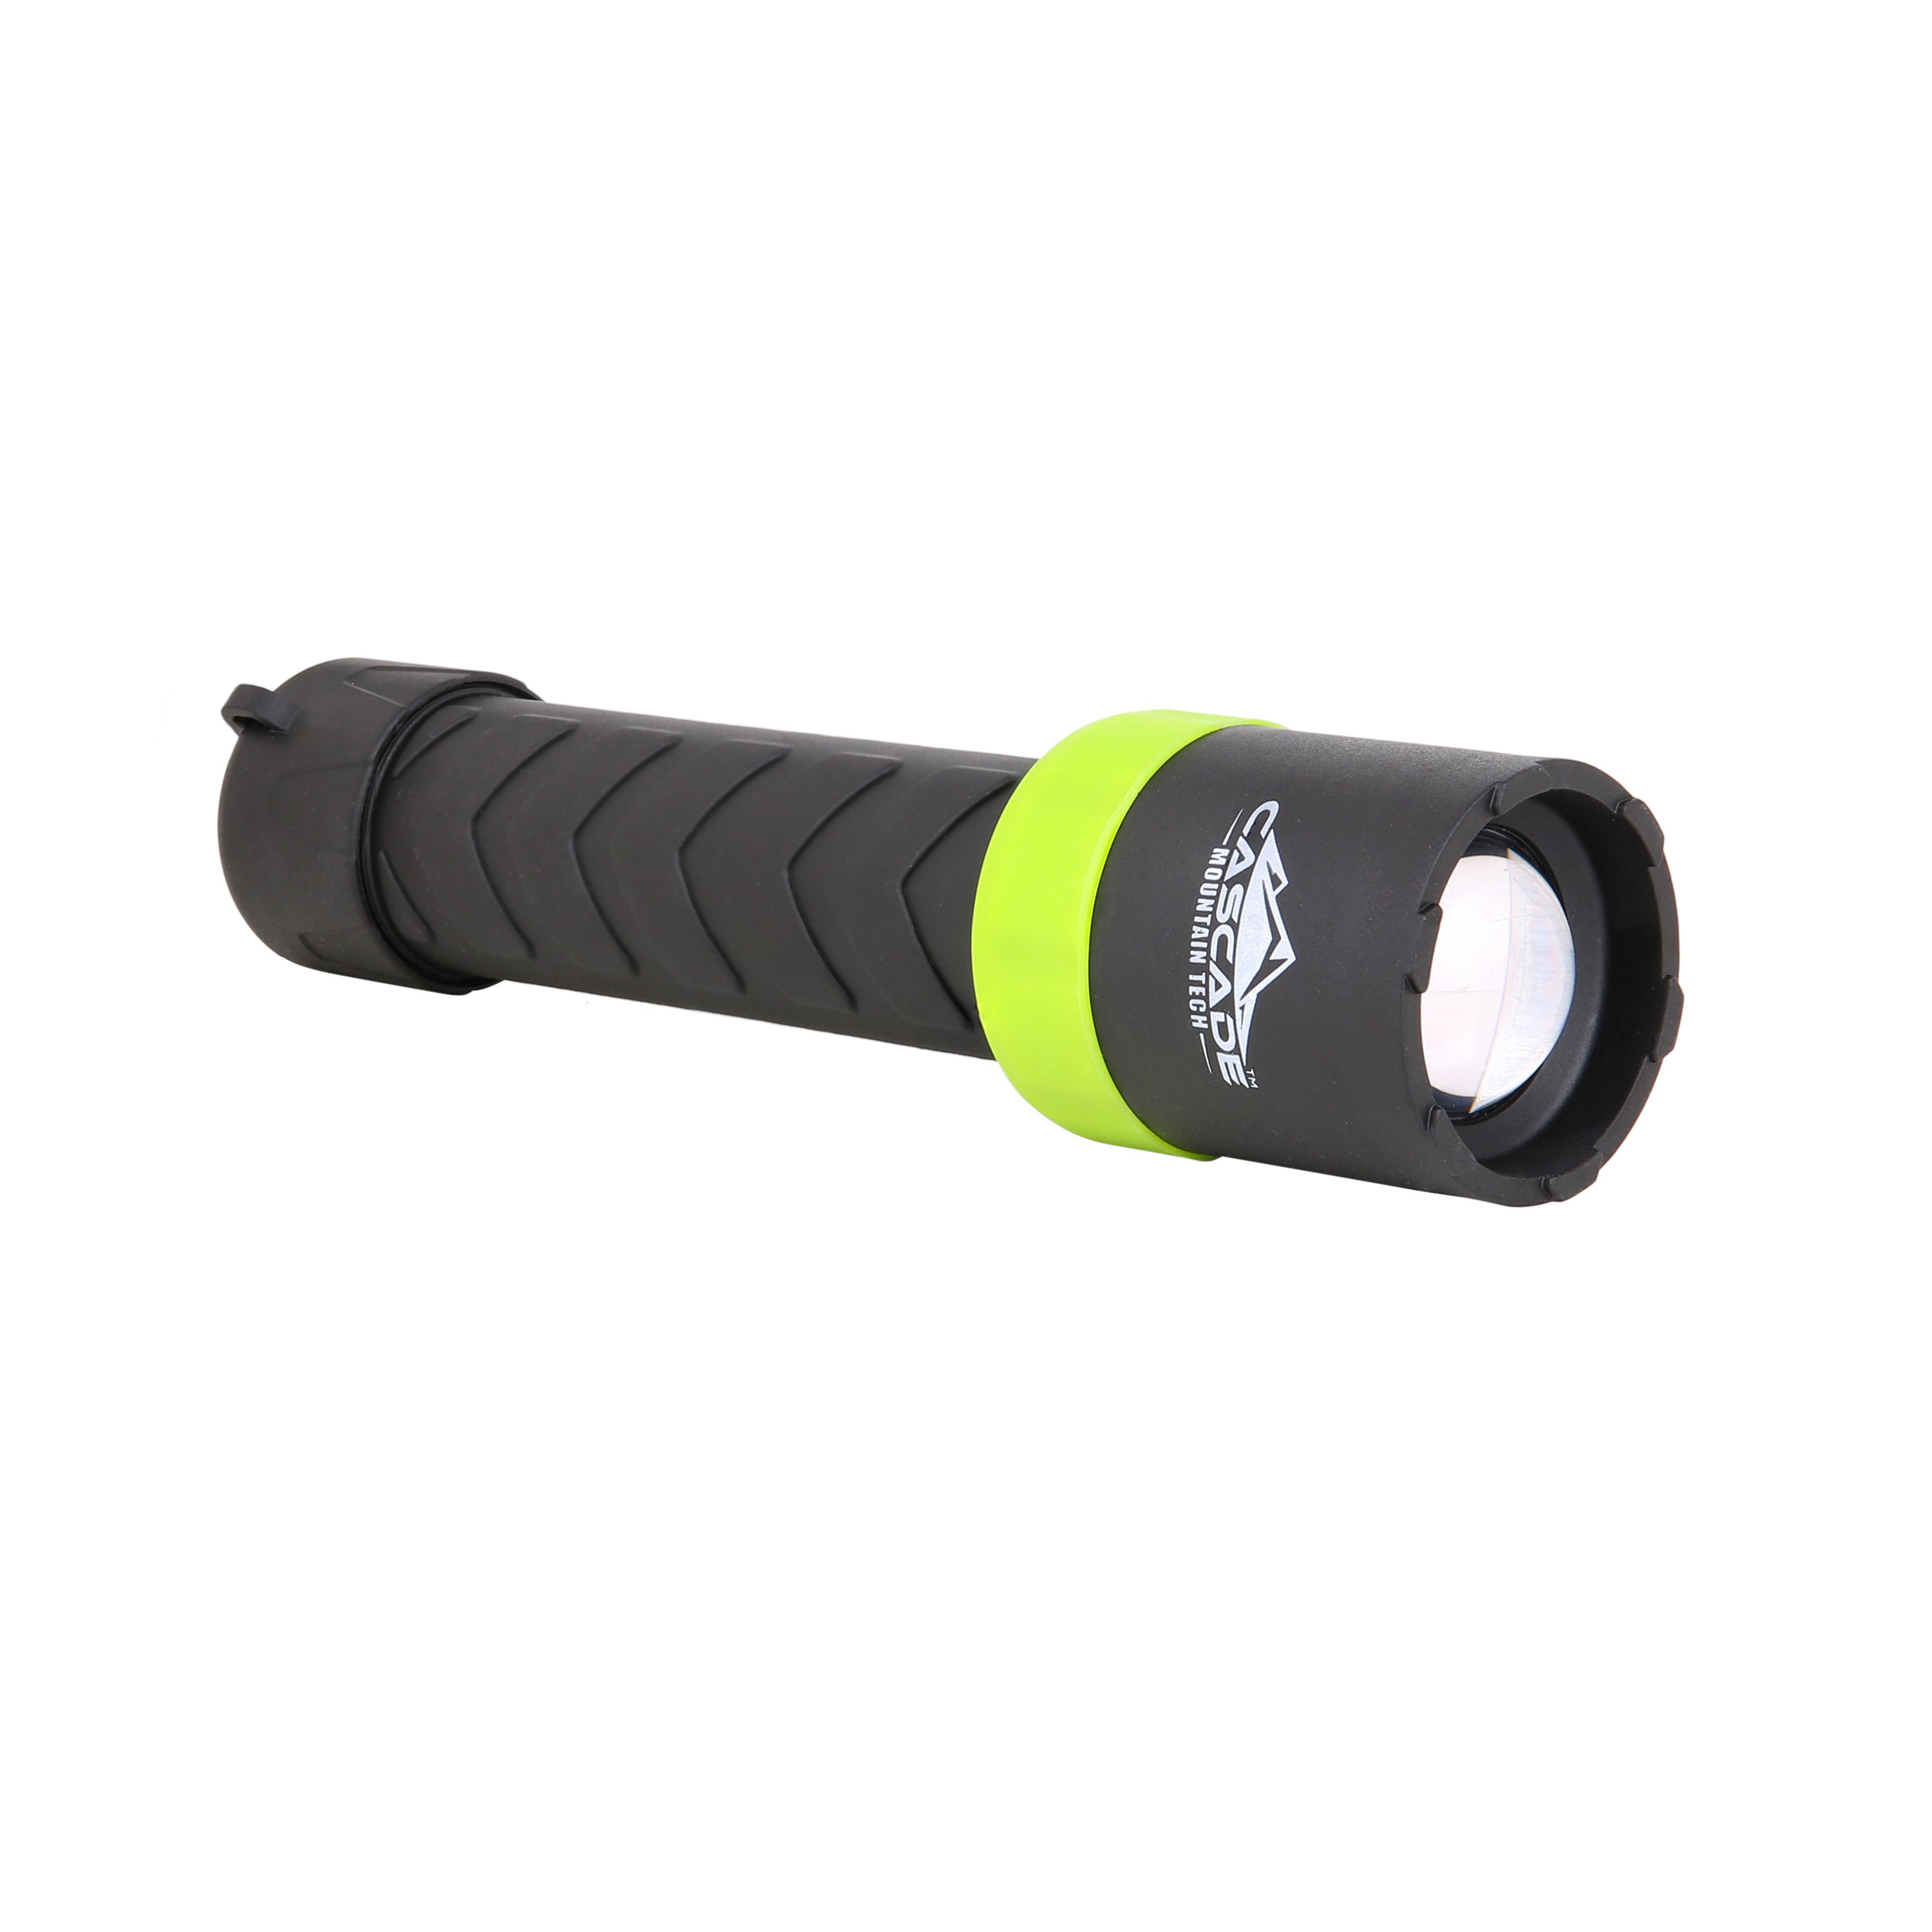 Cascade Mountain Tech Steelcore™ LED Flashlight, 1000 Lumens, Battery Size AA (Batteries Included) – Green - image 1 of 4